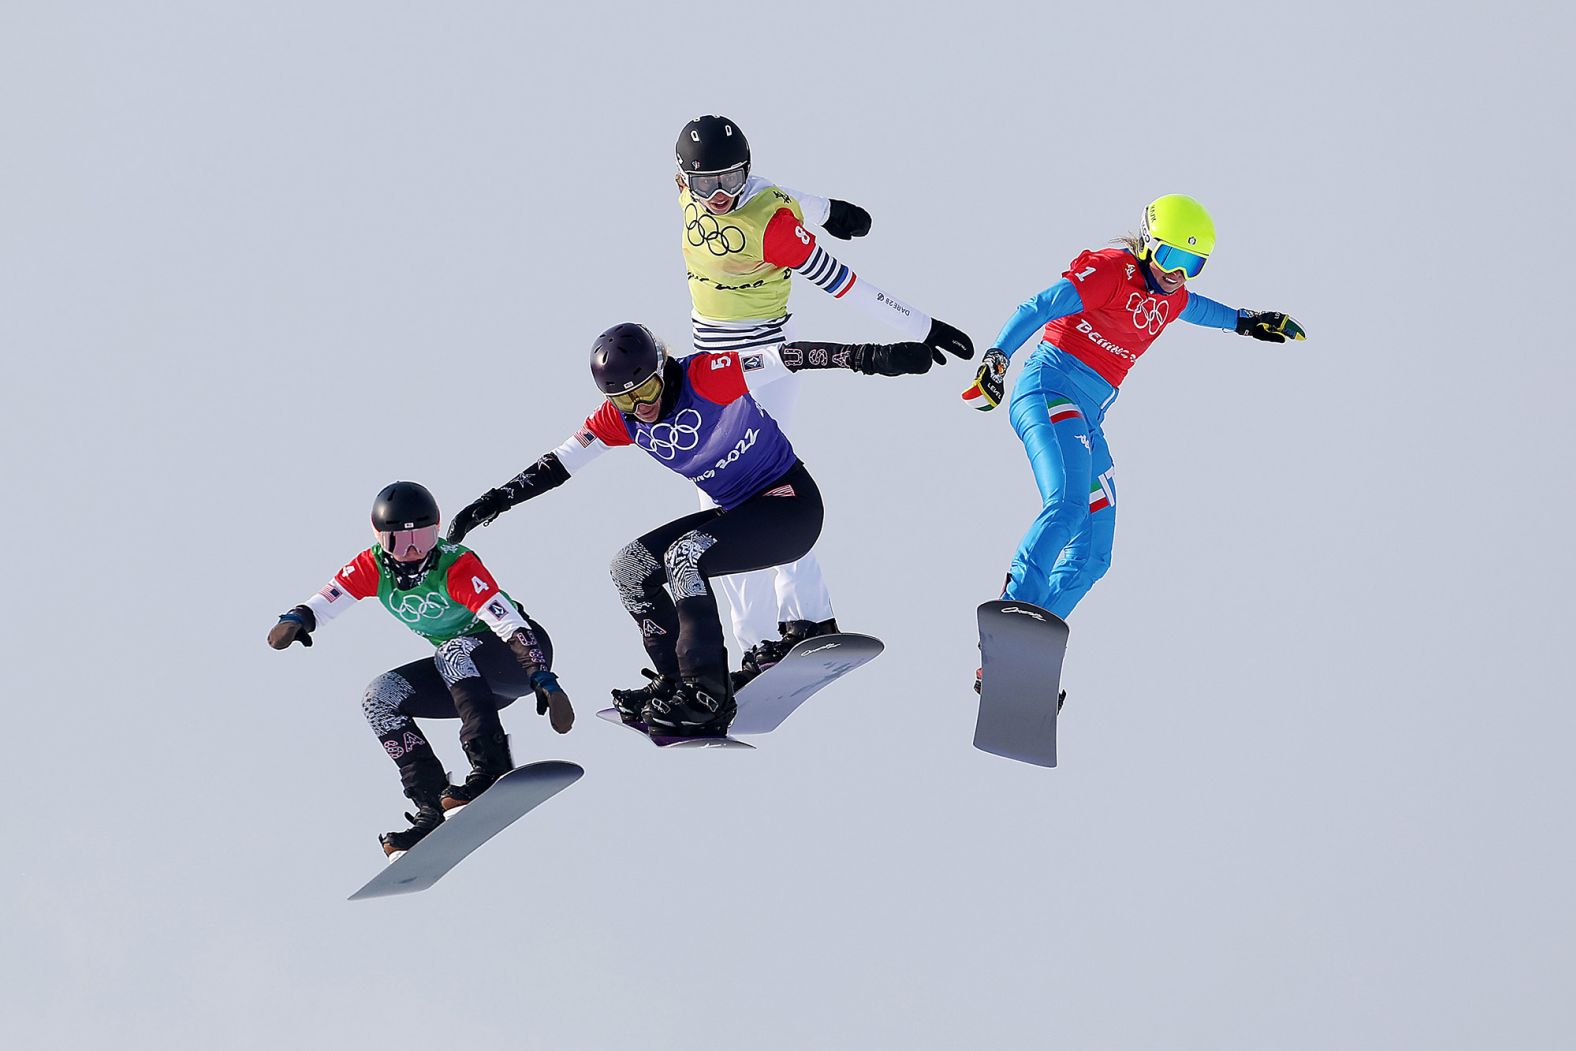 From left, the United States' Stacy Gaskill, the United States' Lindsey Jacobellis, France's Chloe Trespeuch and Italy's Michela Moioli compete in a snowboard cross semifinal on February 9. <a href="index.php?page=&url=https%3A%2F%2Fwww.cnn.com%2Fworld%2Flive-news%2Fbeijing-winter-olympics-02-09-22-spt%2Fh_9fa28ffc70374c24fcb050dd588b6eed" target="_blank">Jacobellis would go on to win the event,</a> her first gold medal in her fifth Olympic Games.